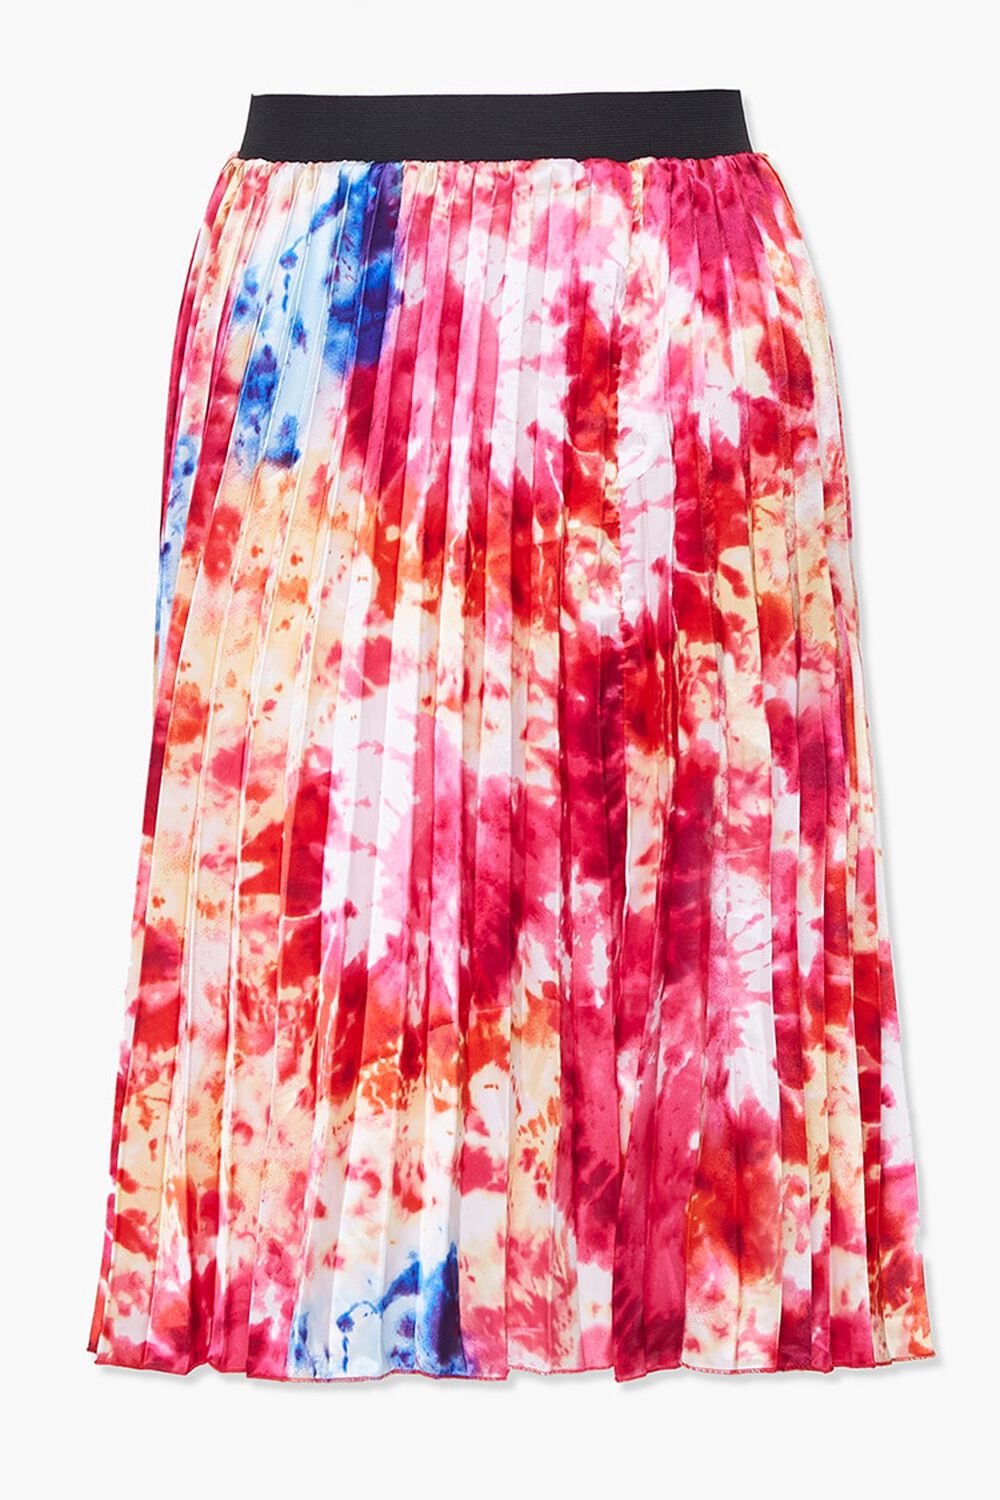 CORAL/MULTI Plus Size Tie-Dye Pleated Skirt, image 1